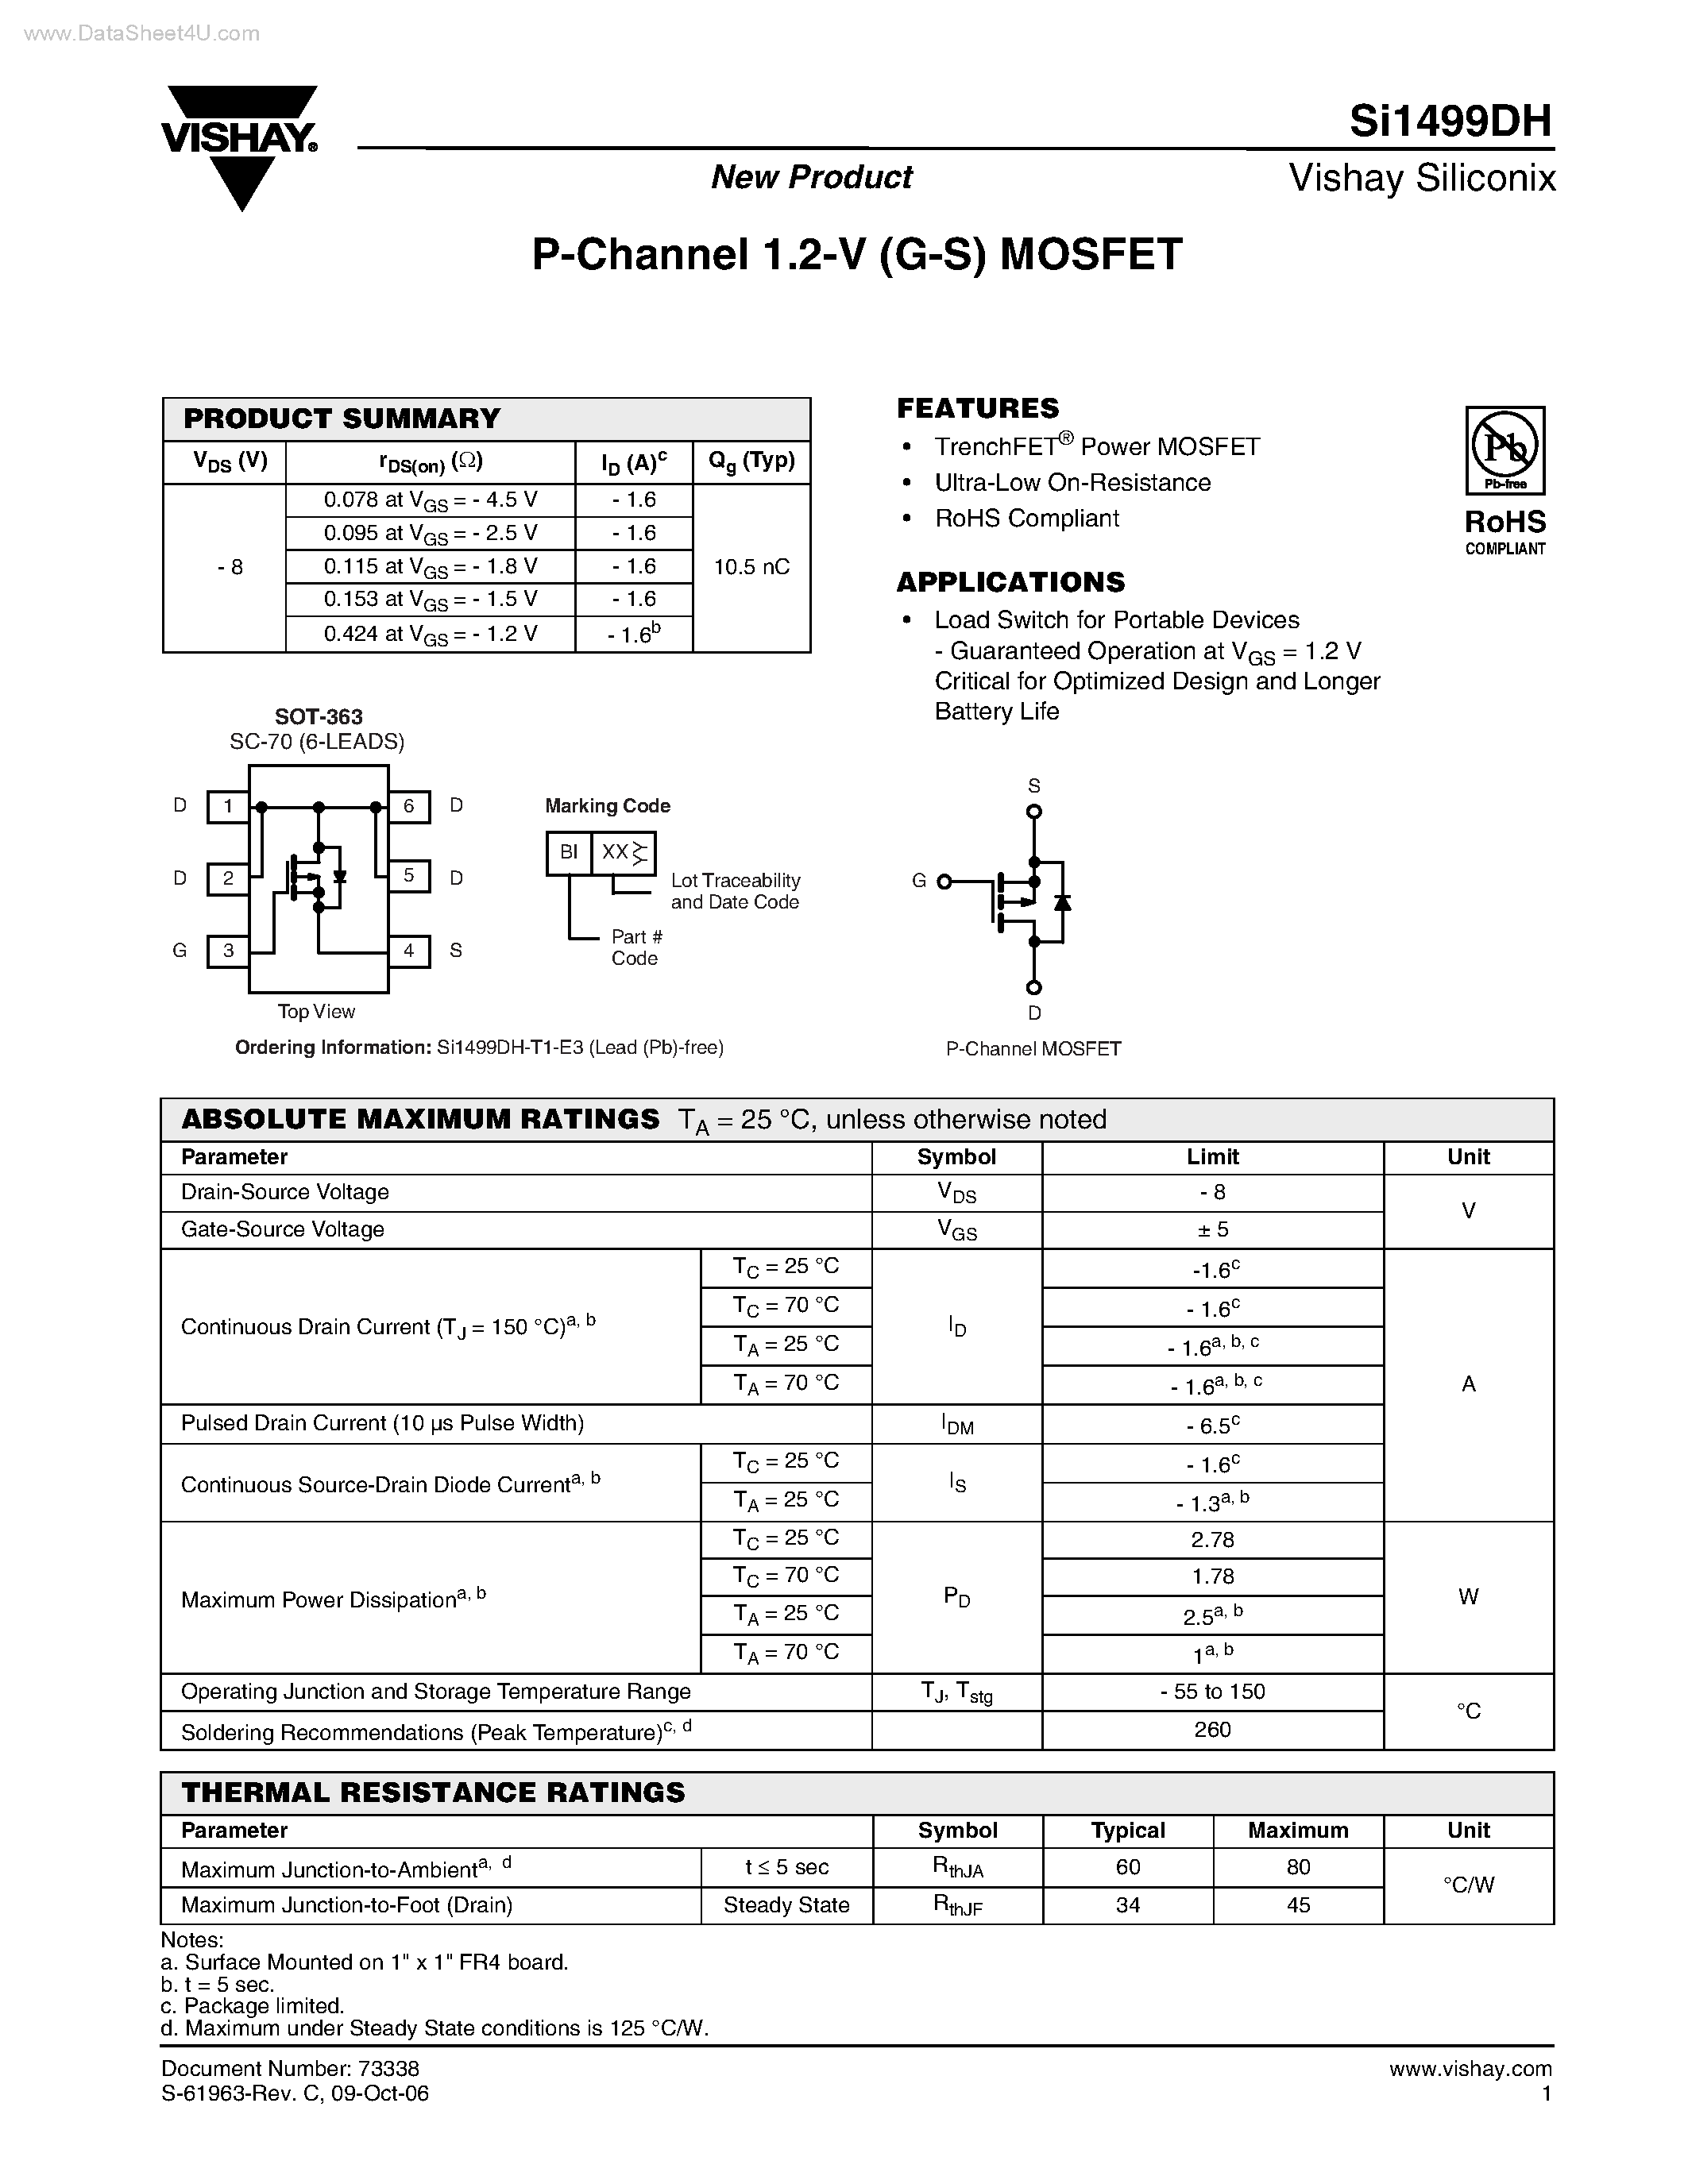 Даташит SI1499DH - P-Channel MOSFET страница 1